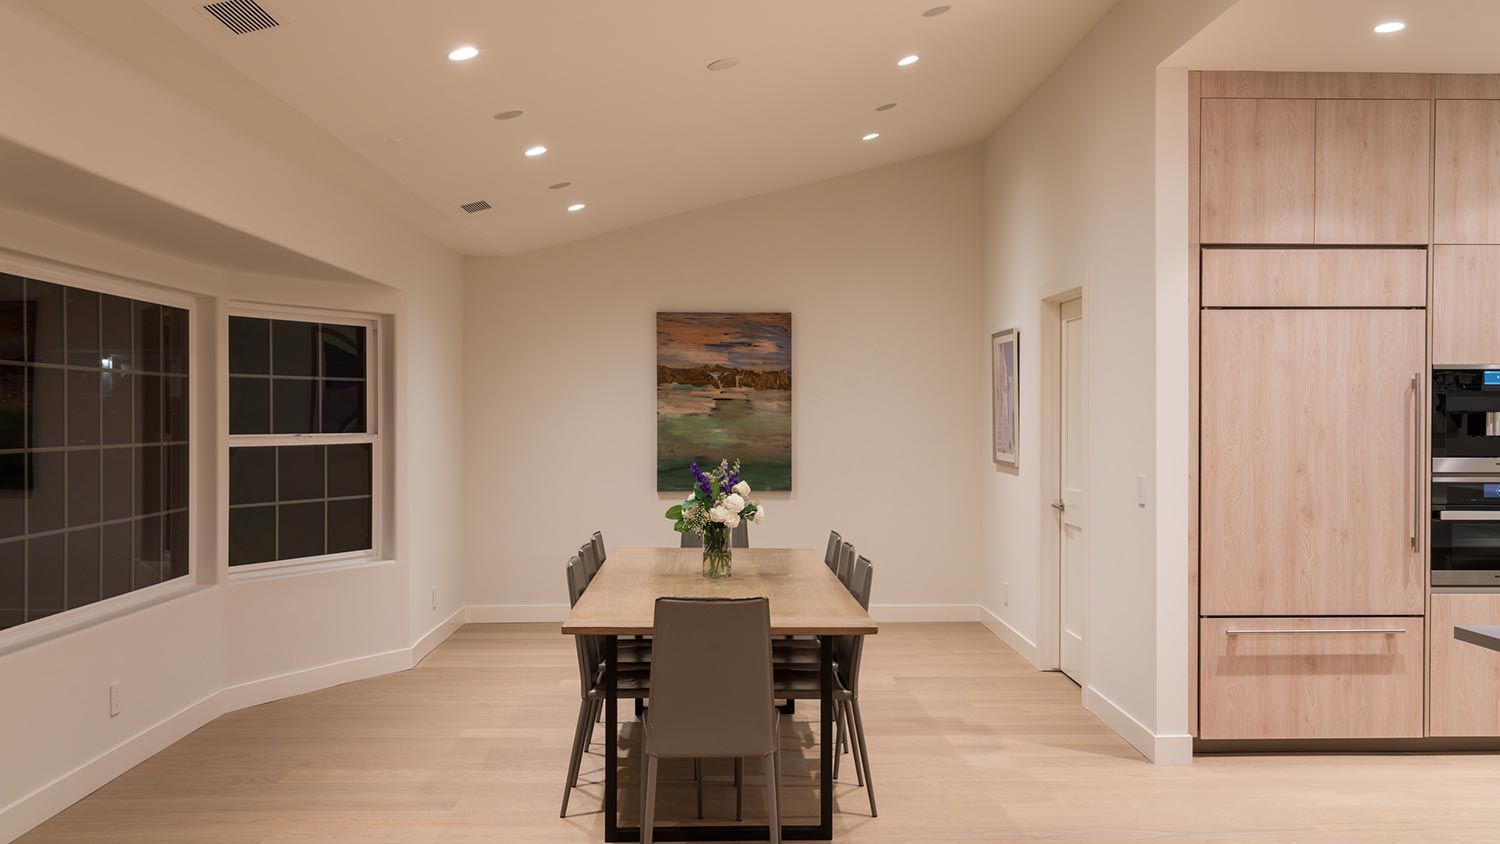 Ketra lighting in a kitchen dining area